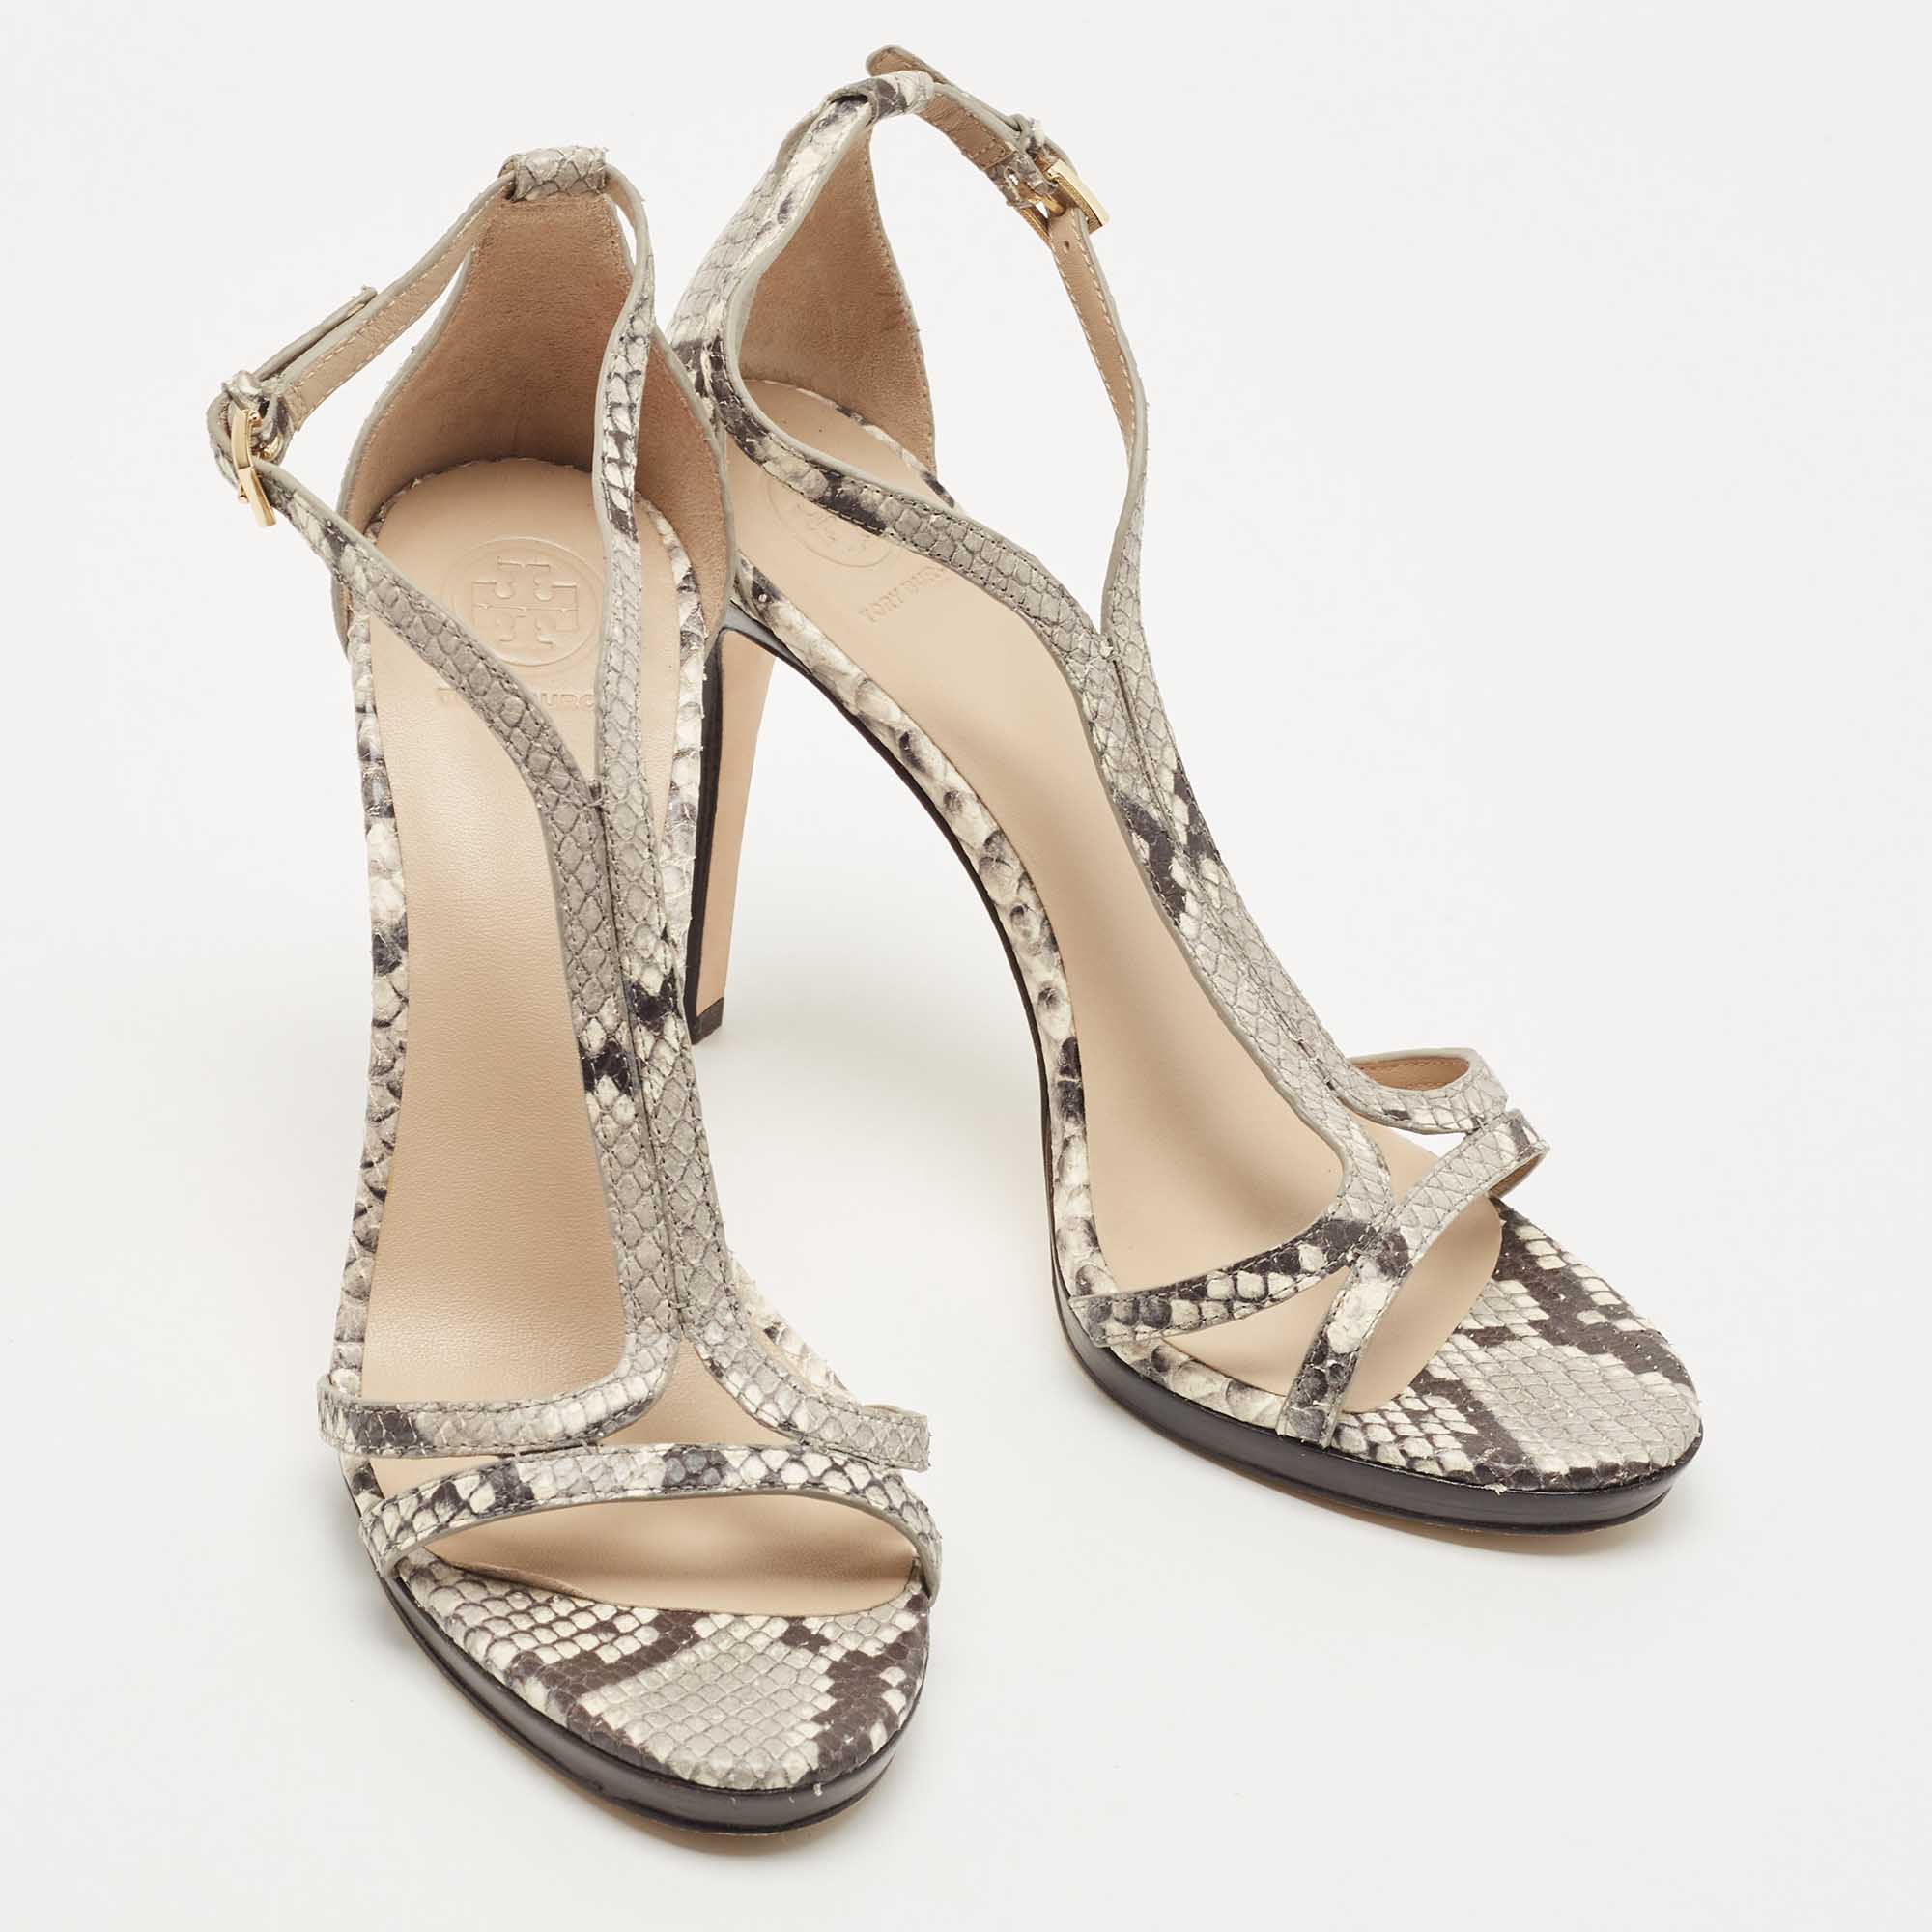 Tory Burch Grey/Black Python Embossed Leather Shelley Sandals Size 38.5